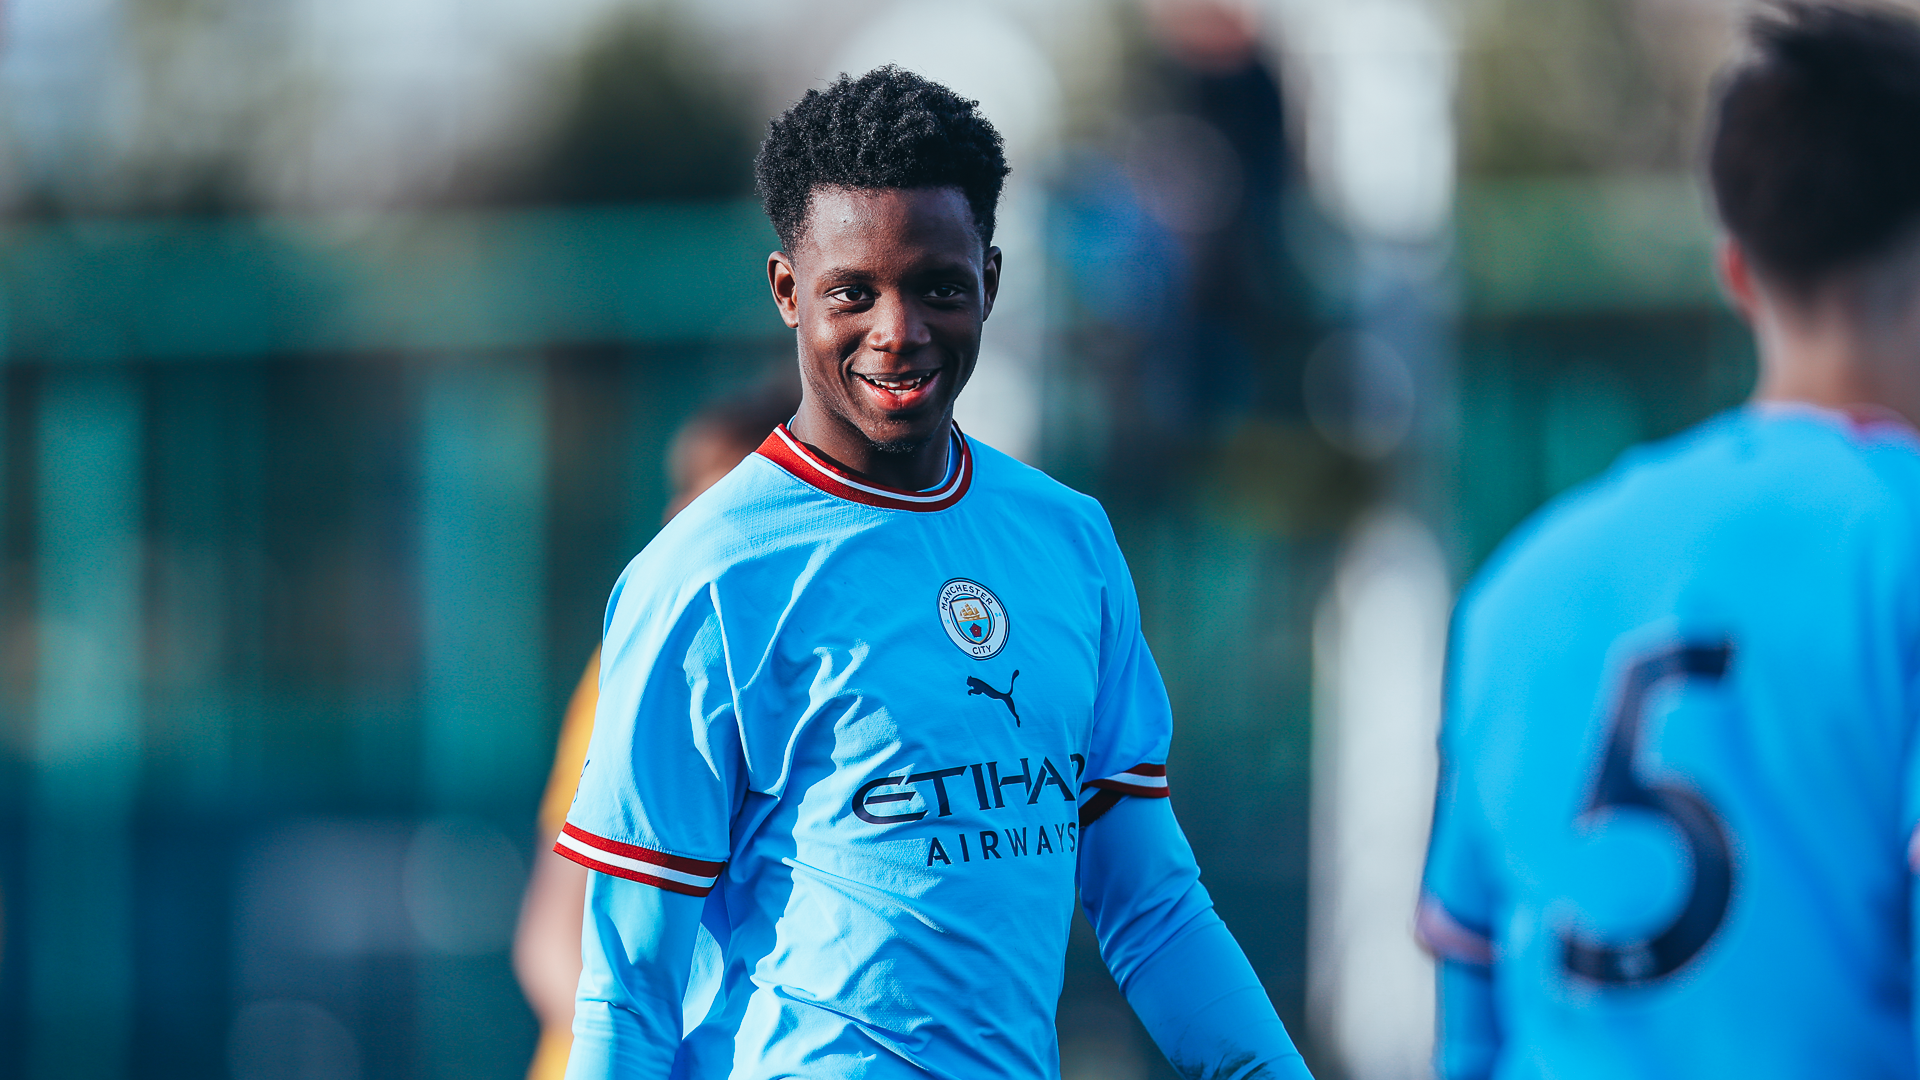 STRIKER ON FORM: Justin Oboavwoduo smiles after being on target again!